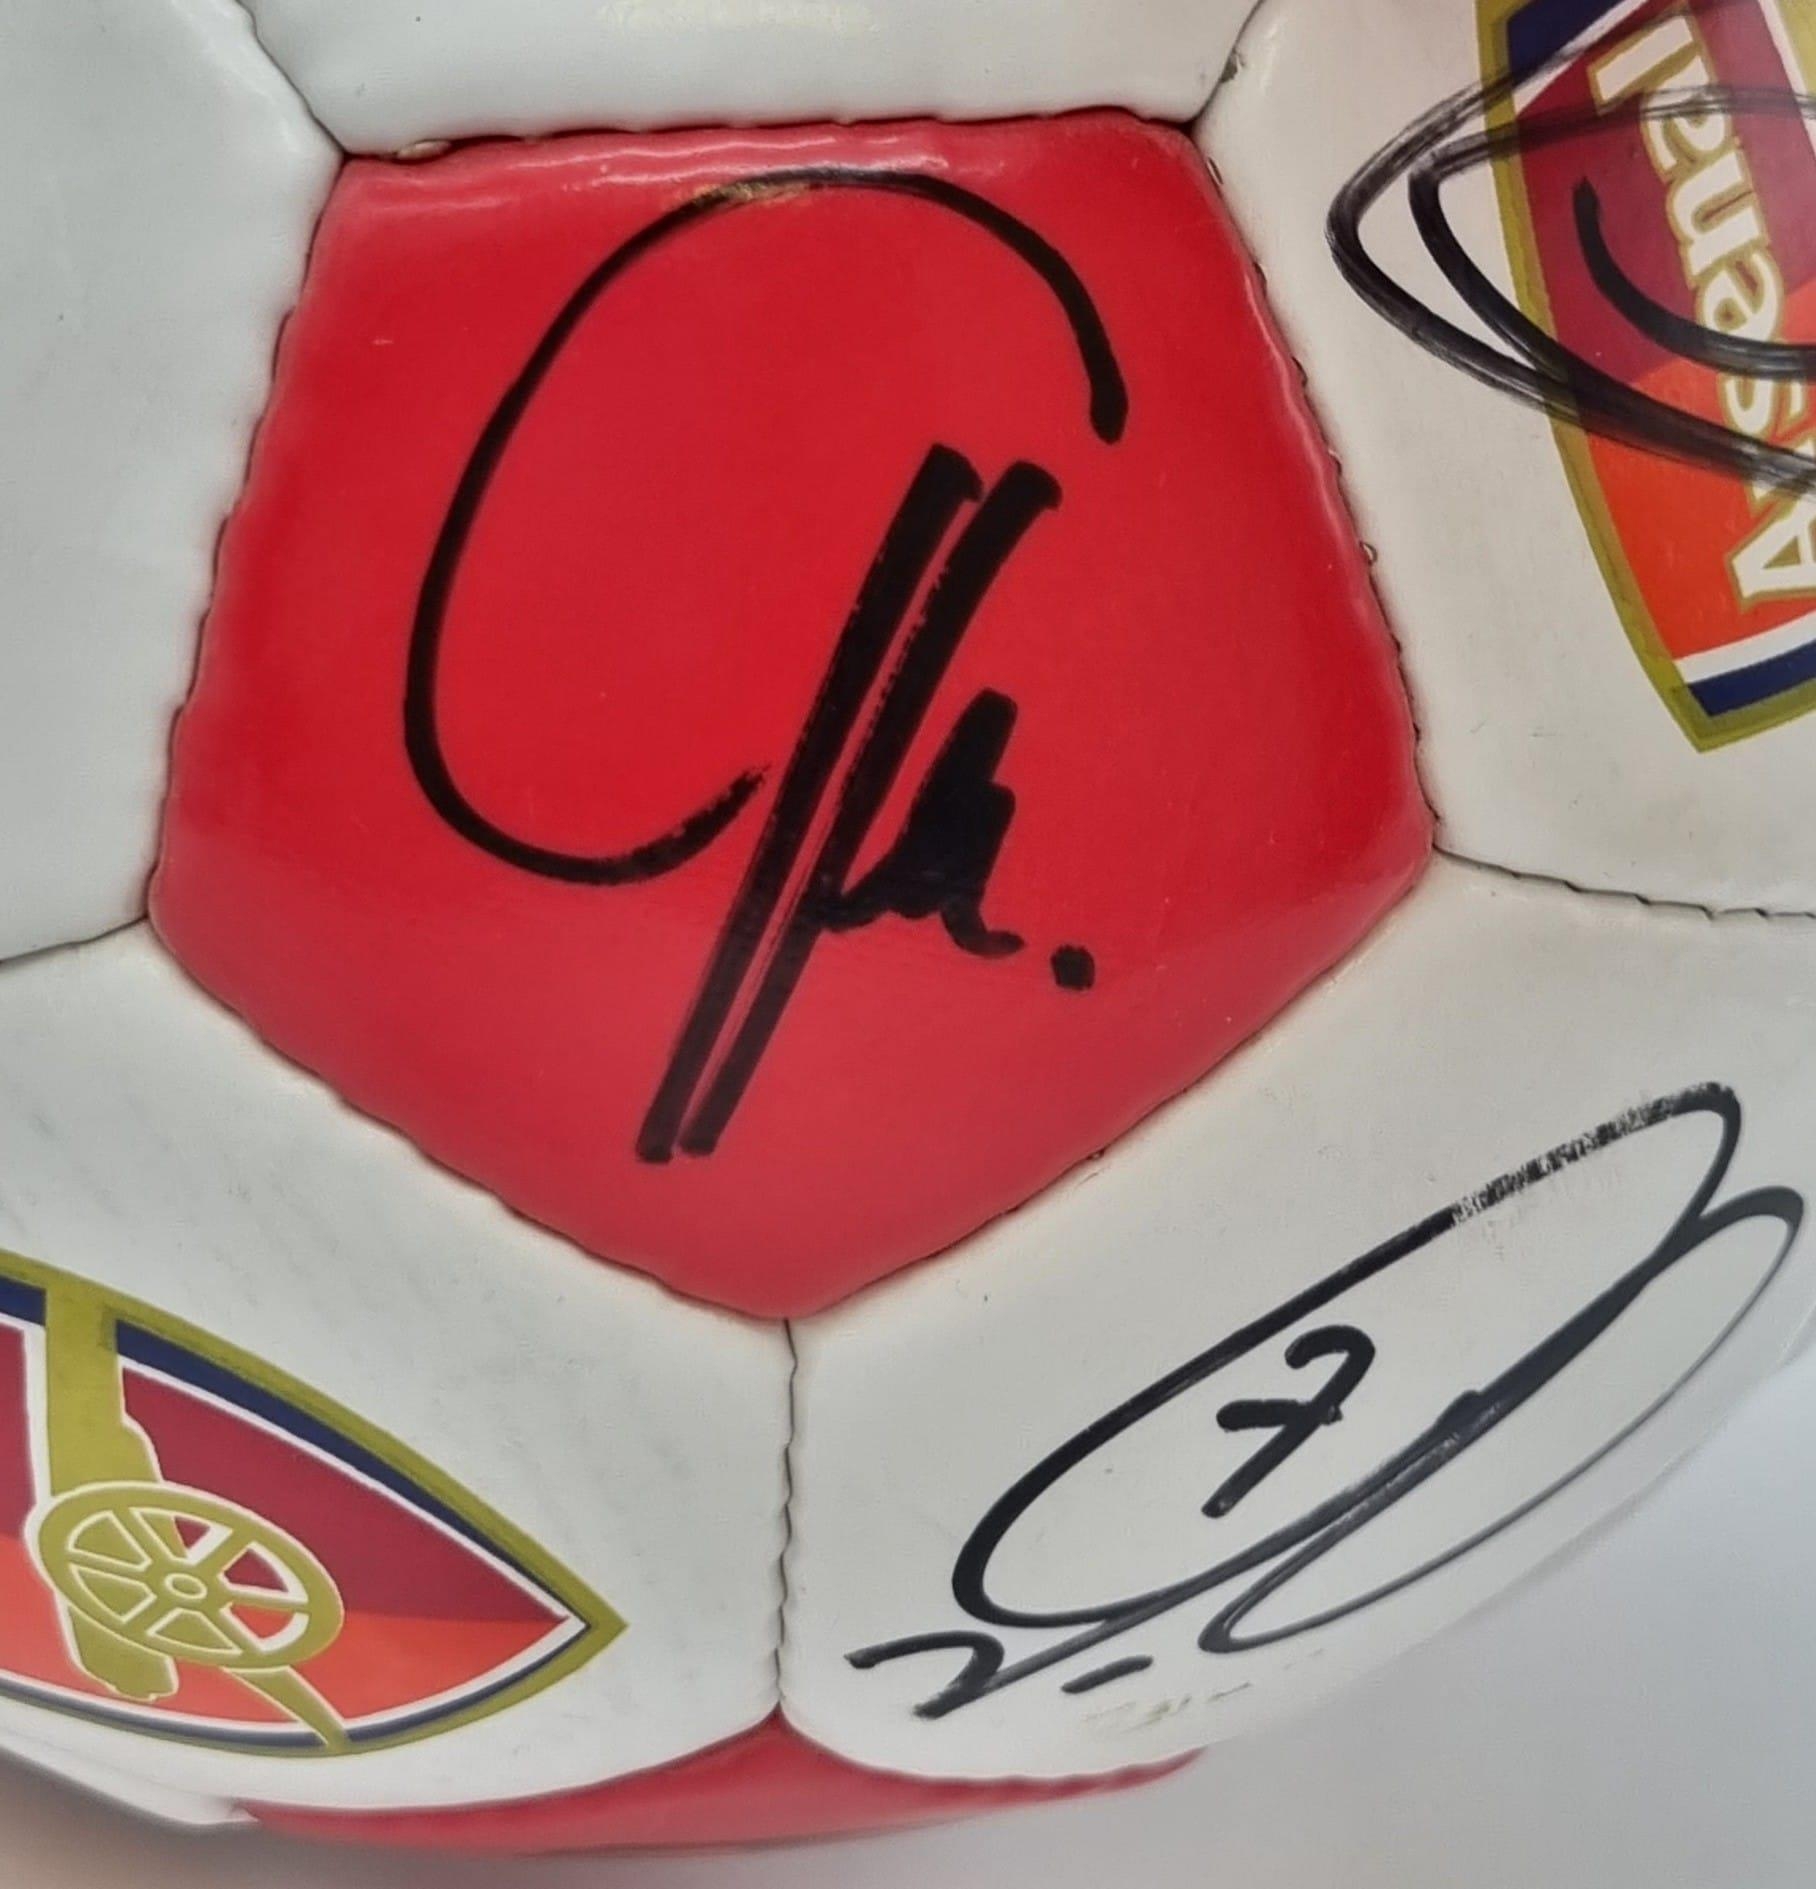 An Incredible Authentic Arsenal FC Invincibles Signed Premier League Winners Football - 2003/4 - Image 19 of 19